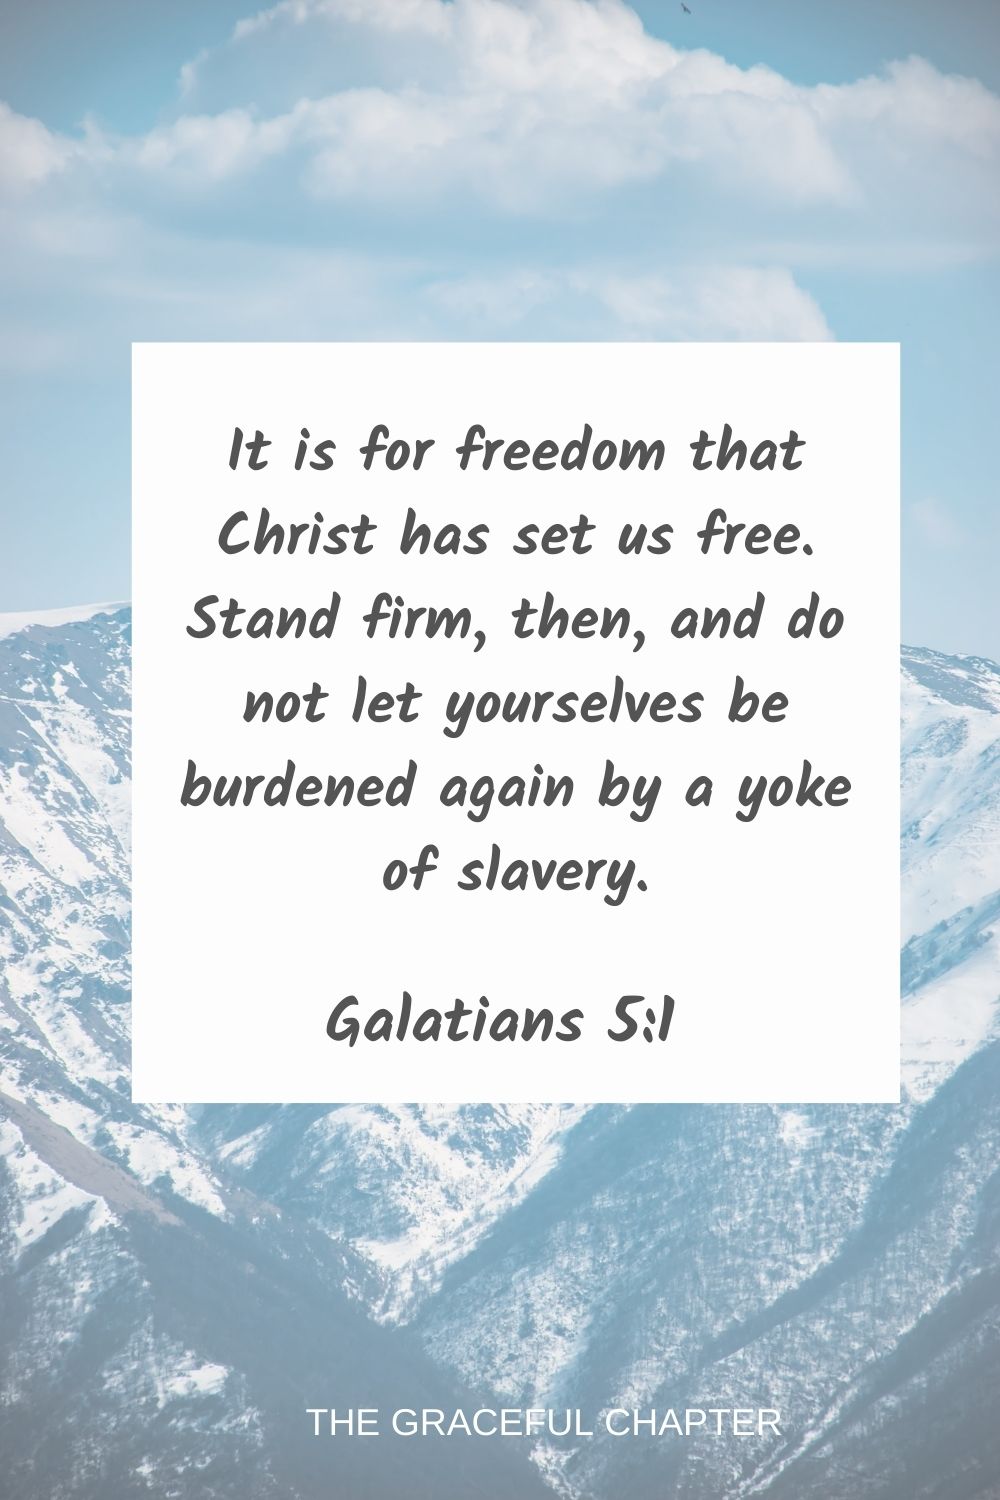 It is for freedom that Christ has set us free. Stand firm, then, and do not let yourselves be burdened again by a yoke of slavery. Galatians 5:1